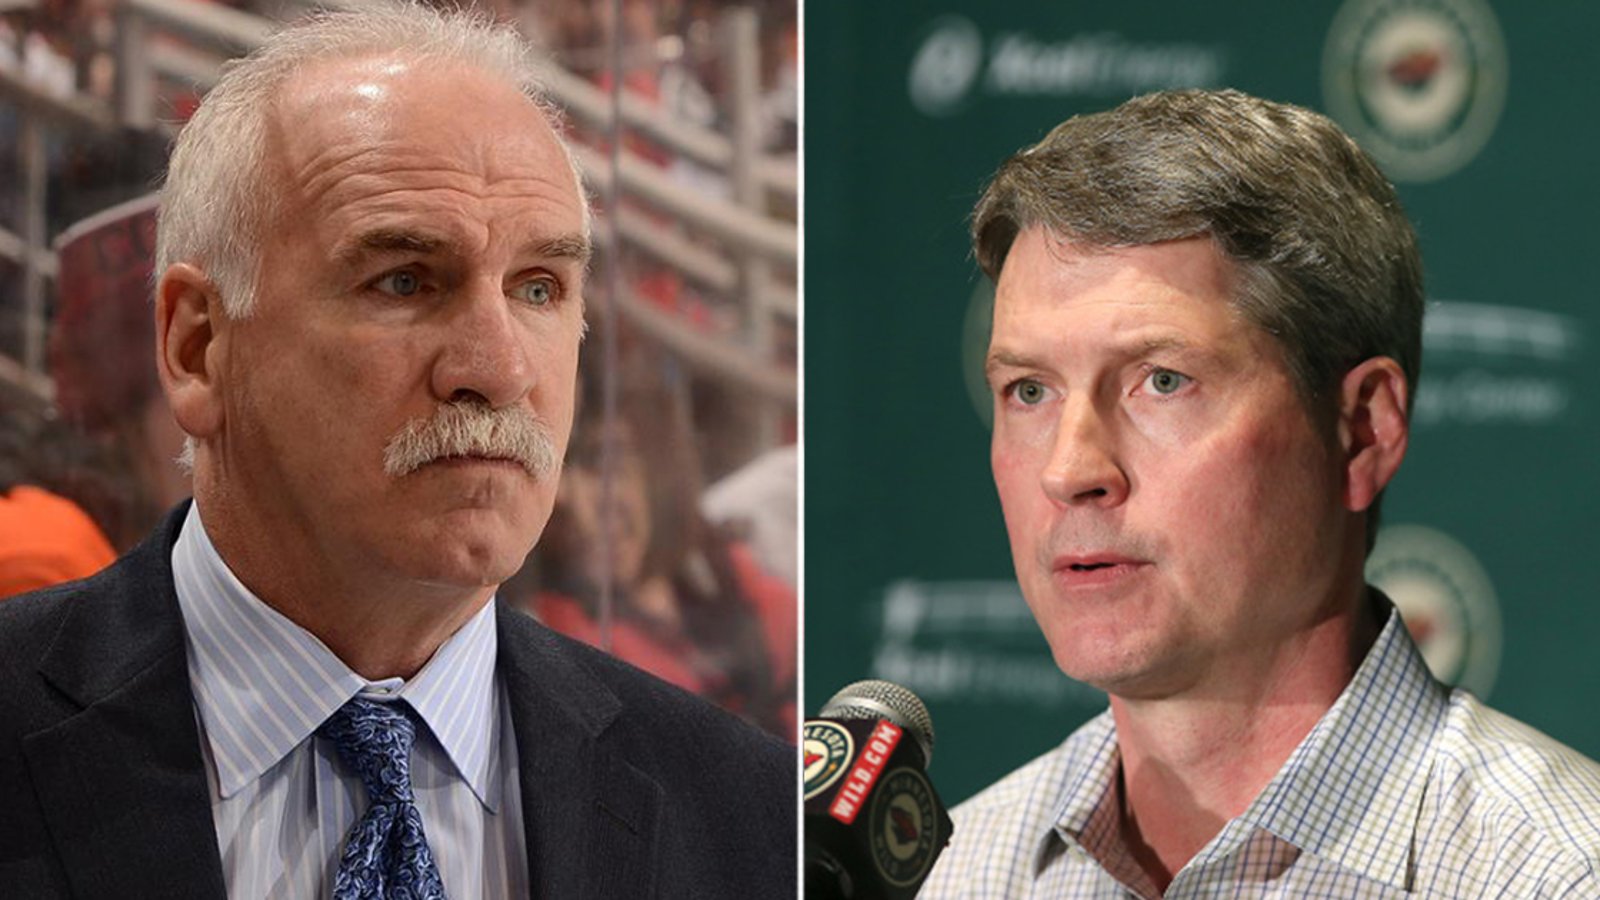 NHL insider reports of a potential double Quenneville/Fletcher hiring in Philly